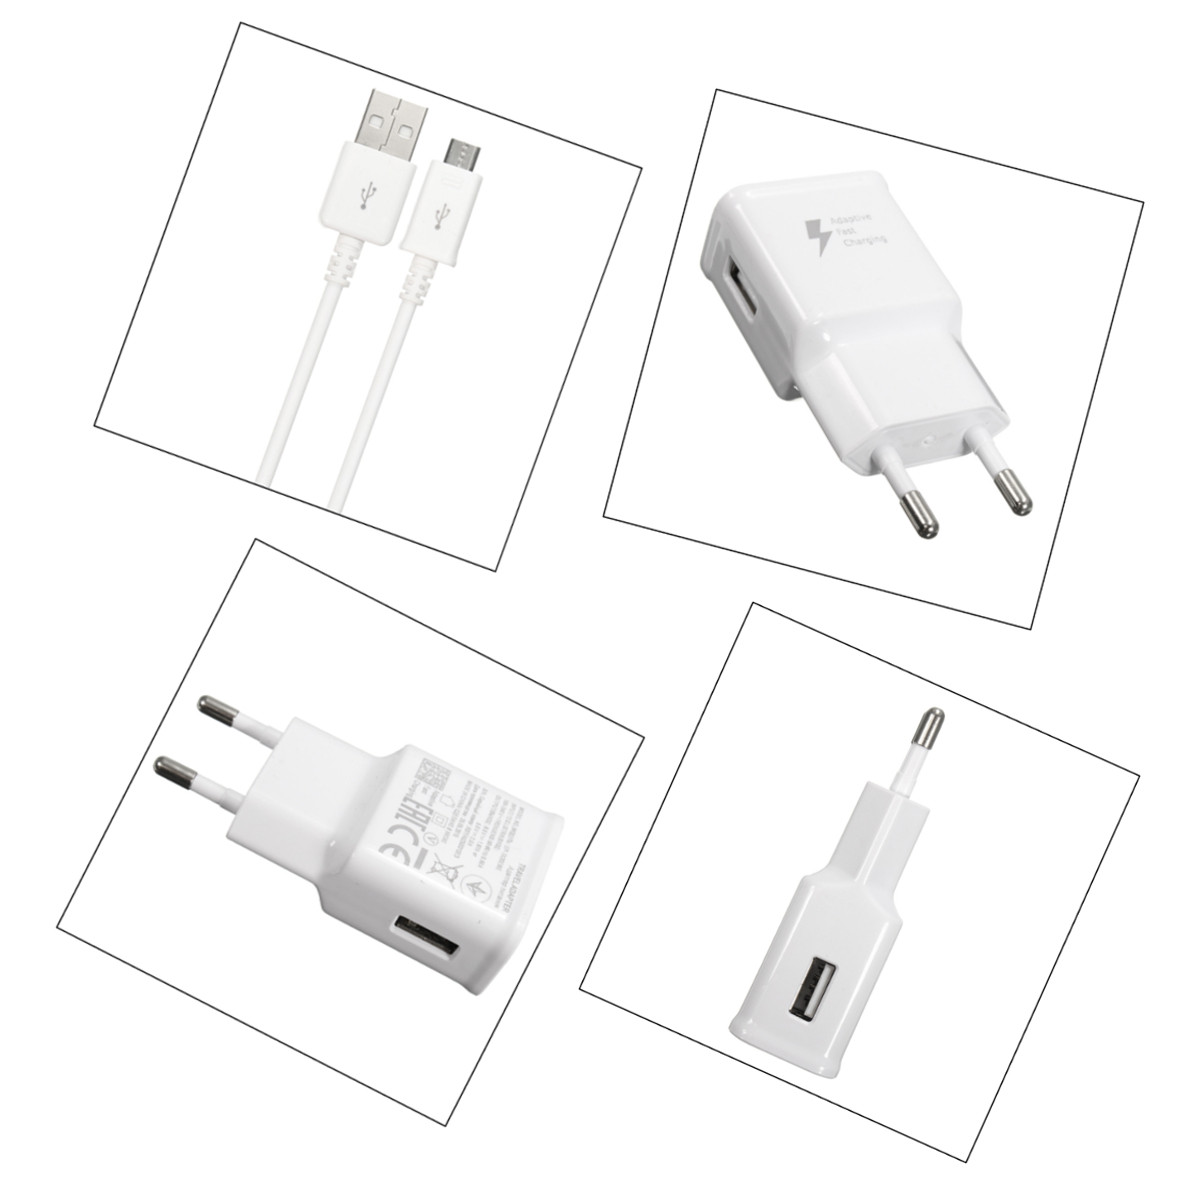 Bakeey-EU-9V-2A-Micro-USB-Charger-Charging-Cable-Adapter-For-Samsung-Xiaomi-Huawei-1111445-1